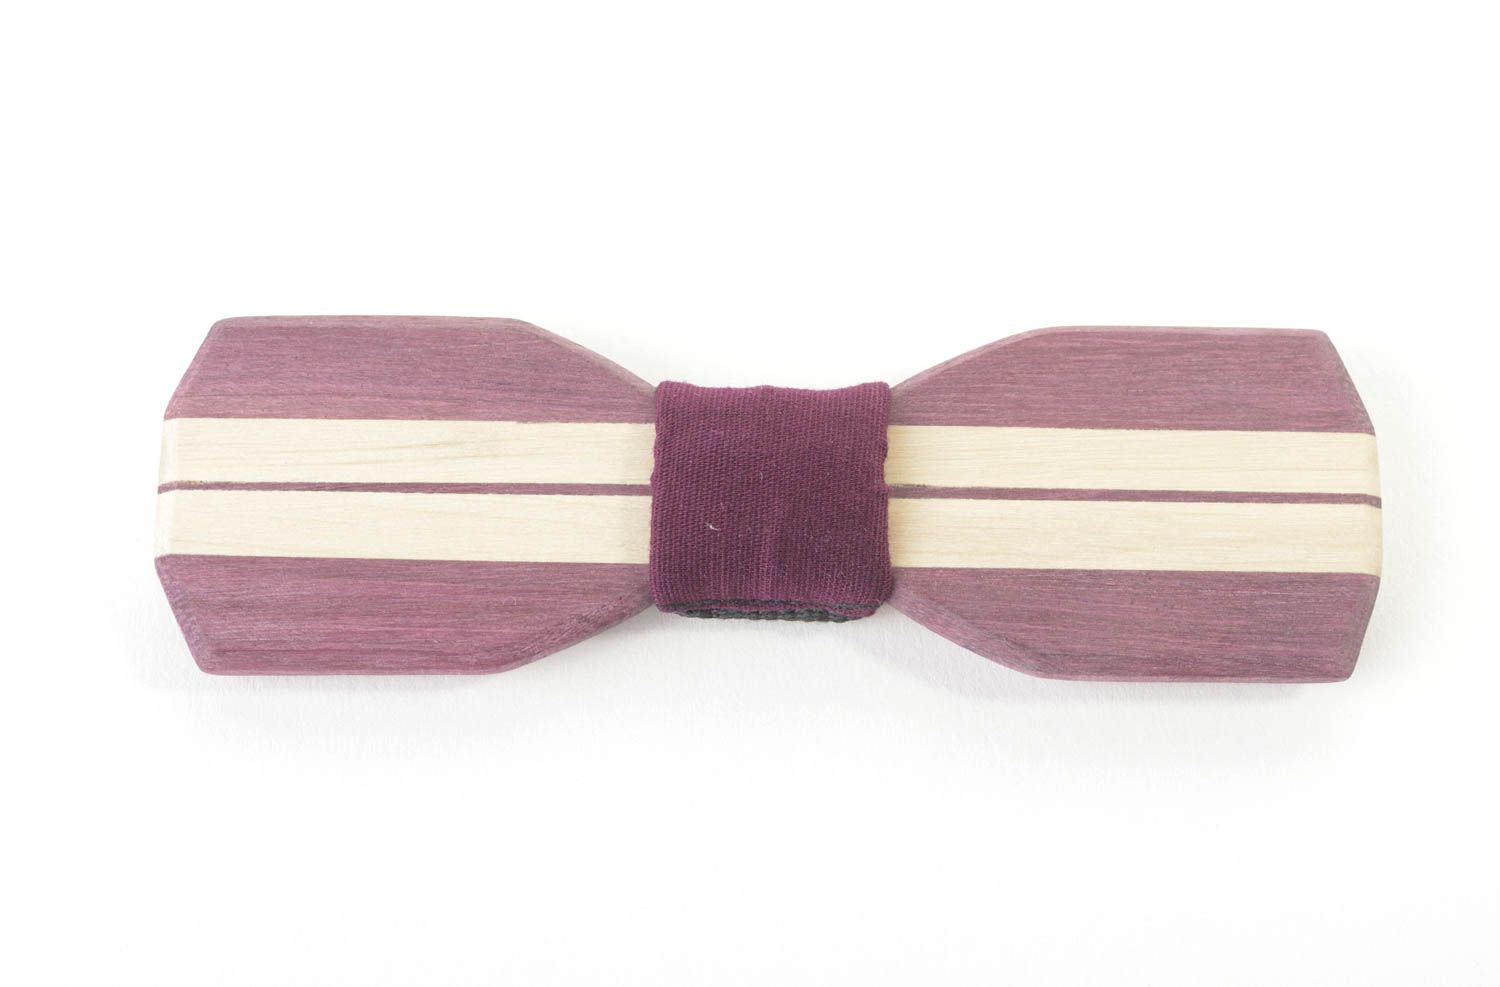 Handmade wooden bow ties stylish bow ties for men nice present for friend photo 4